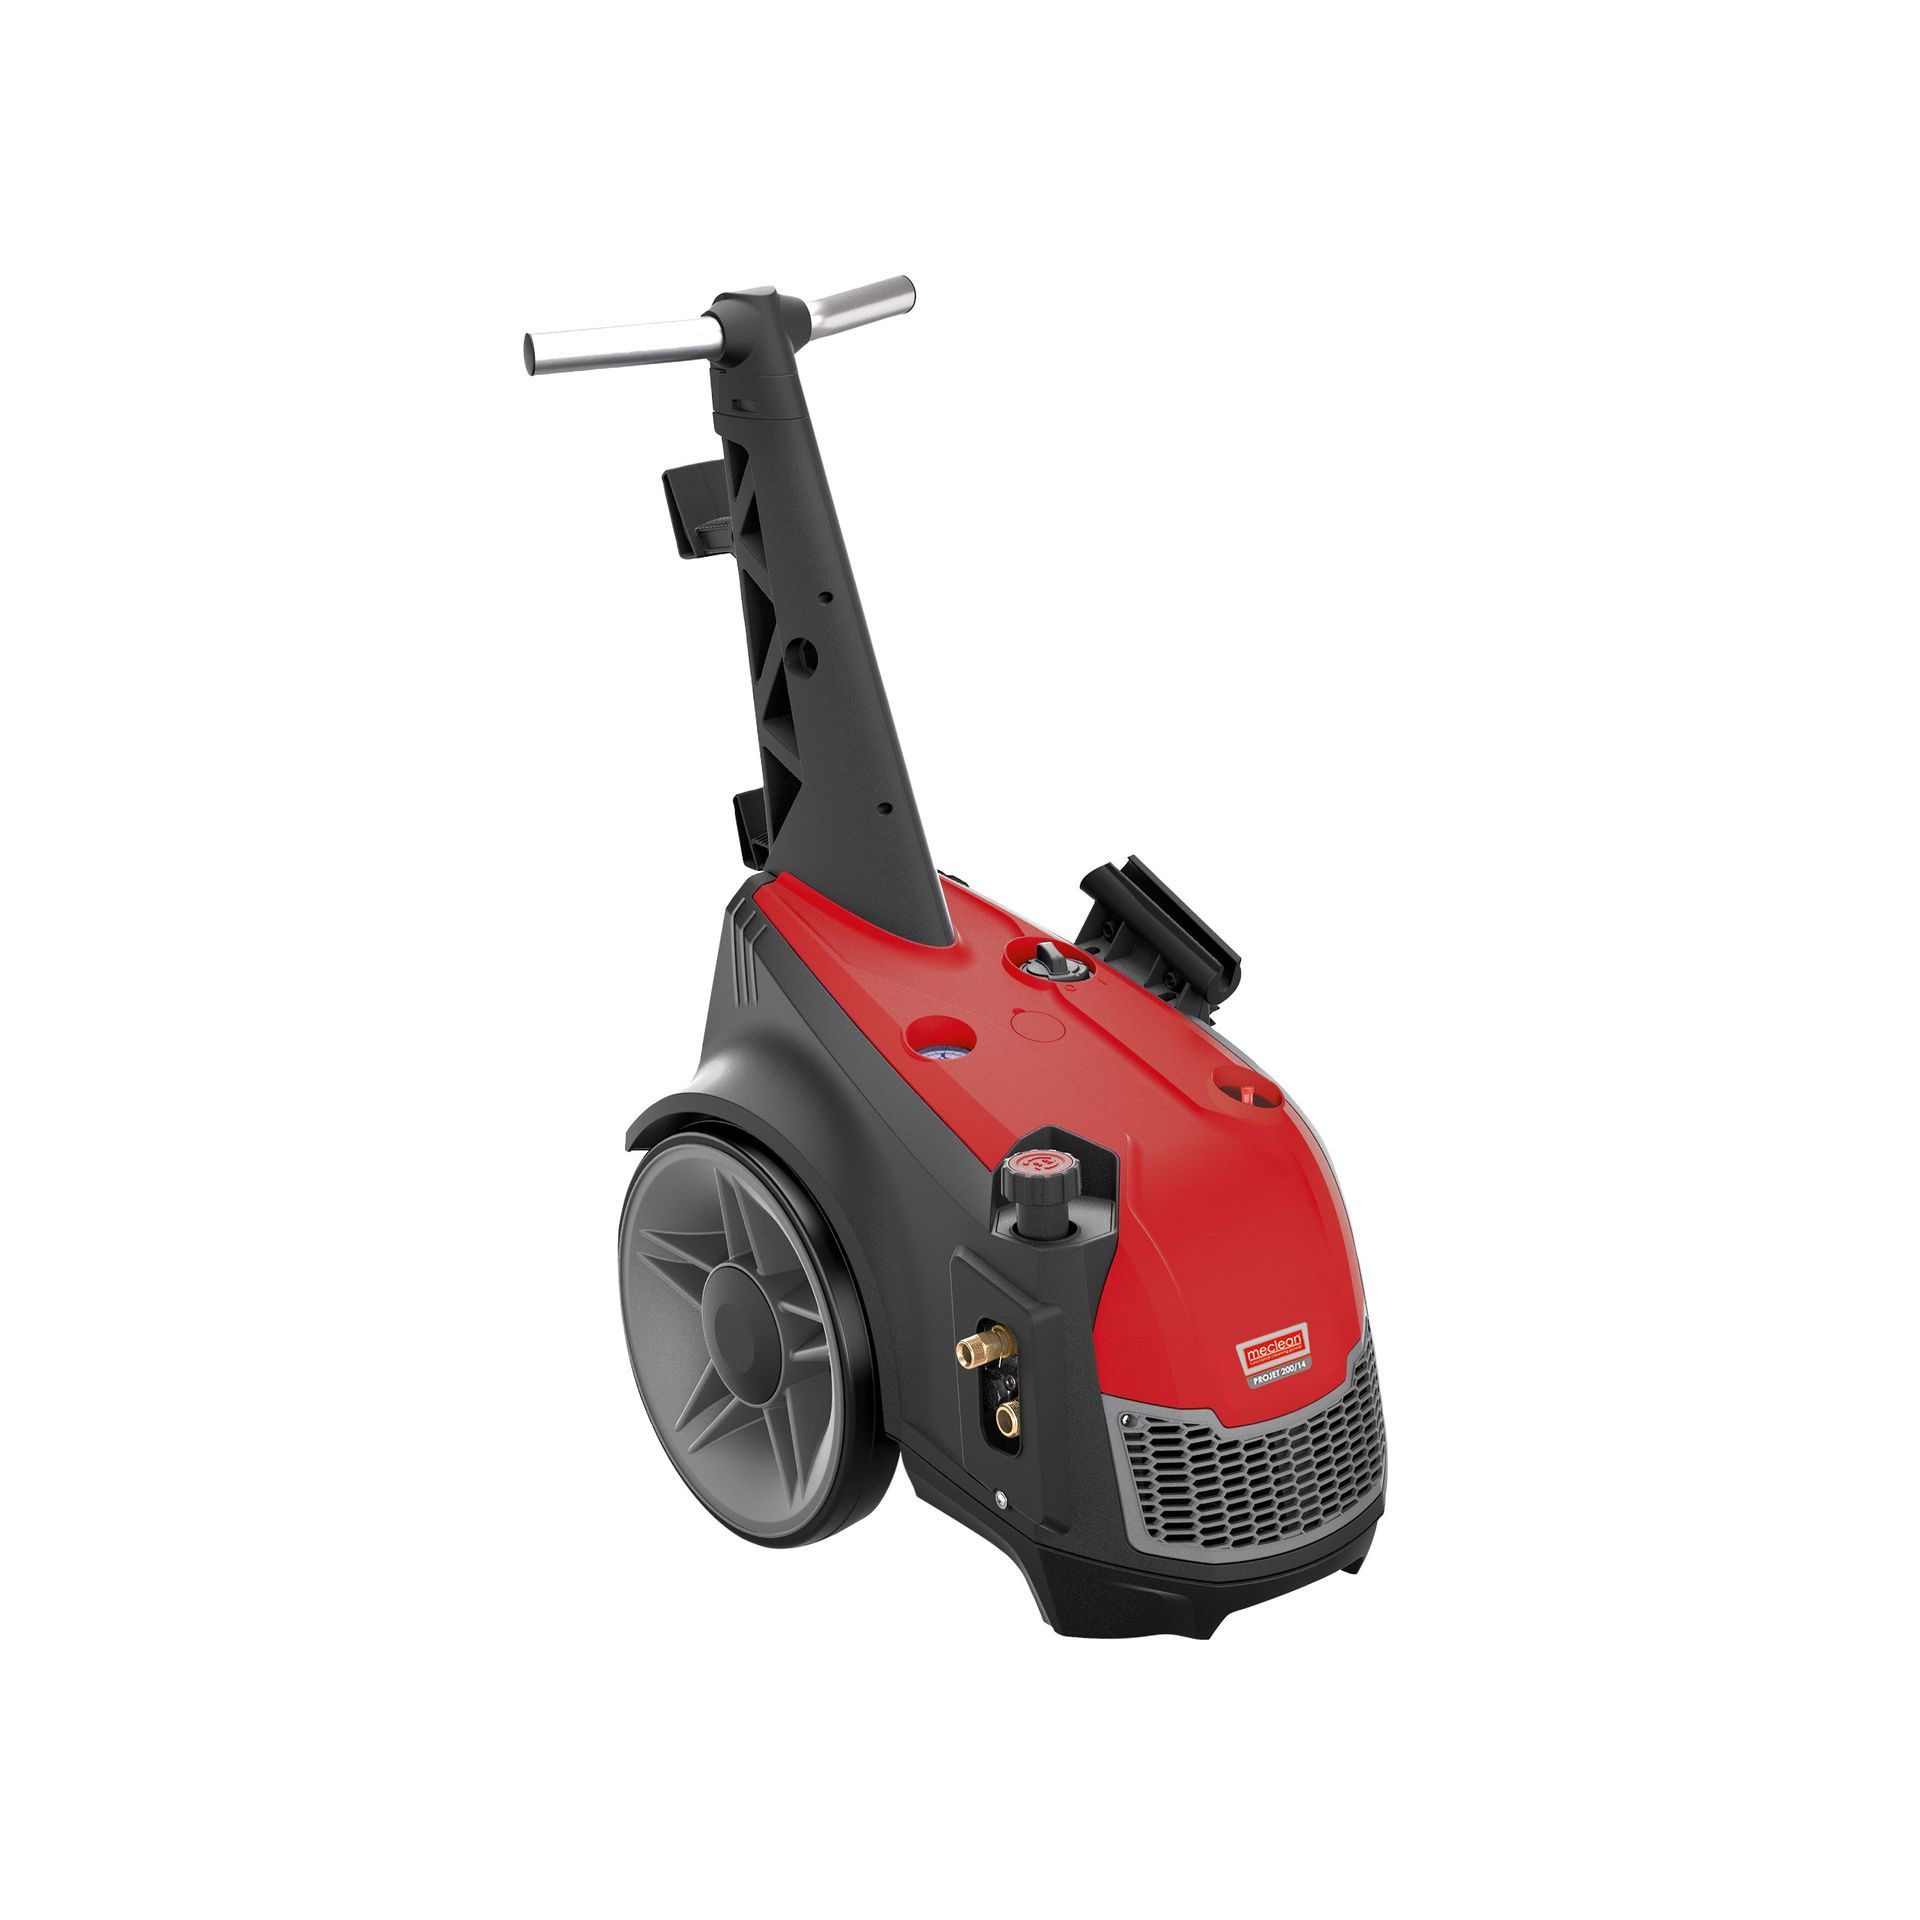 Meclean professional cold water high pressure washer PROJET 200/14